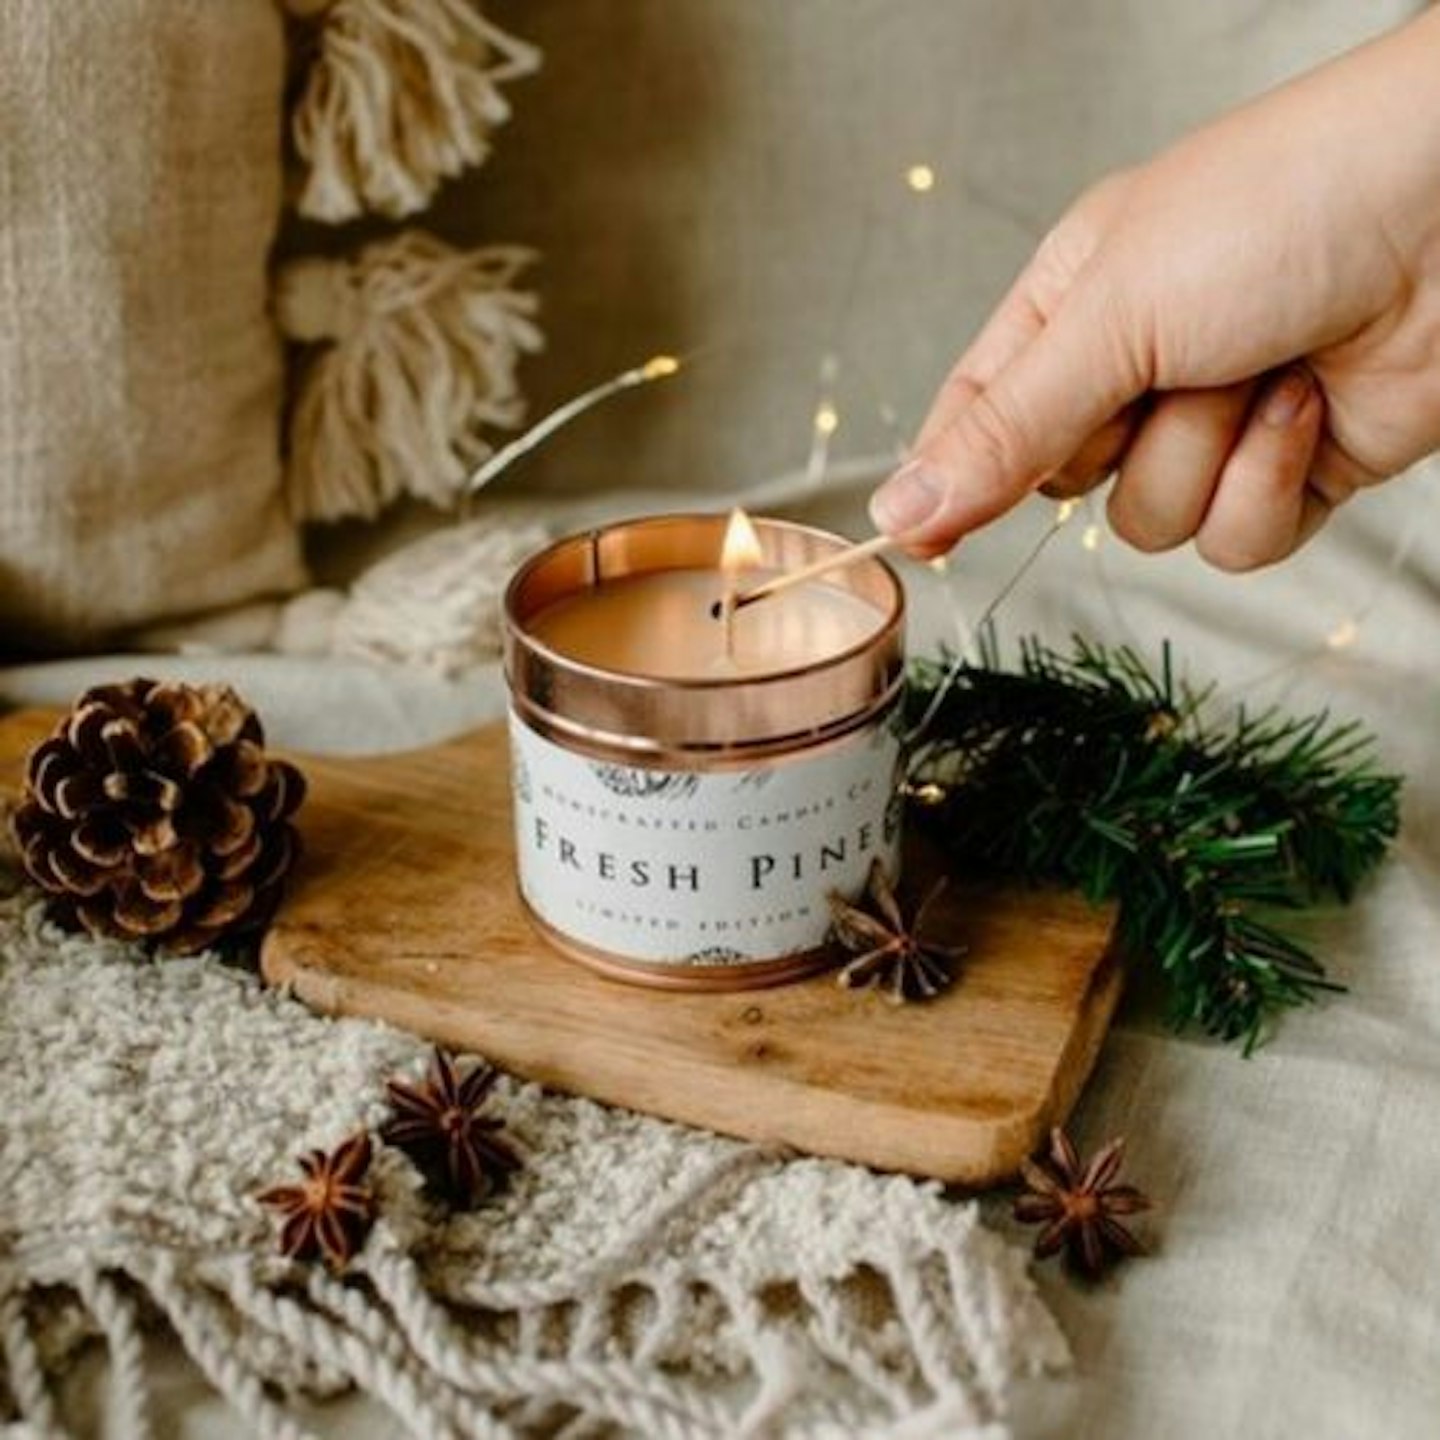 Fresh Pine Winter Walk Scented Candles